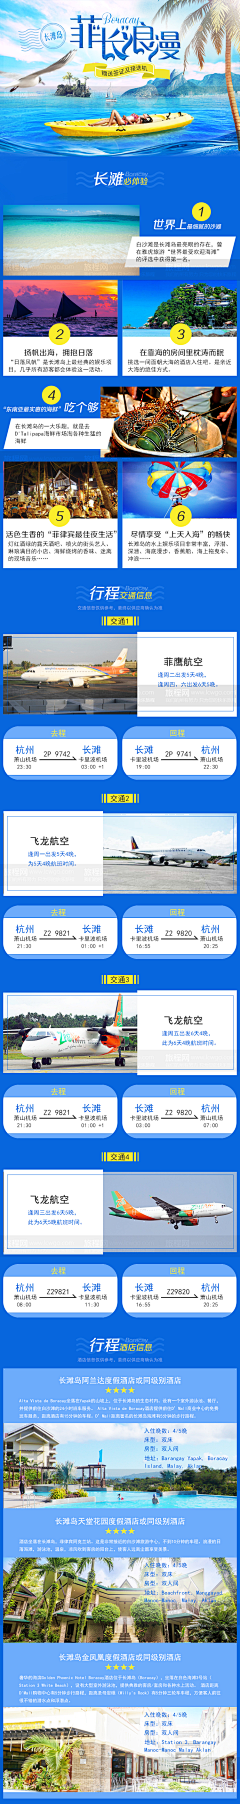 Lucia丸采集到travel 旅游